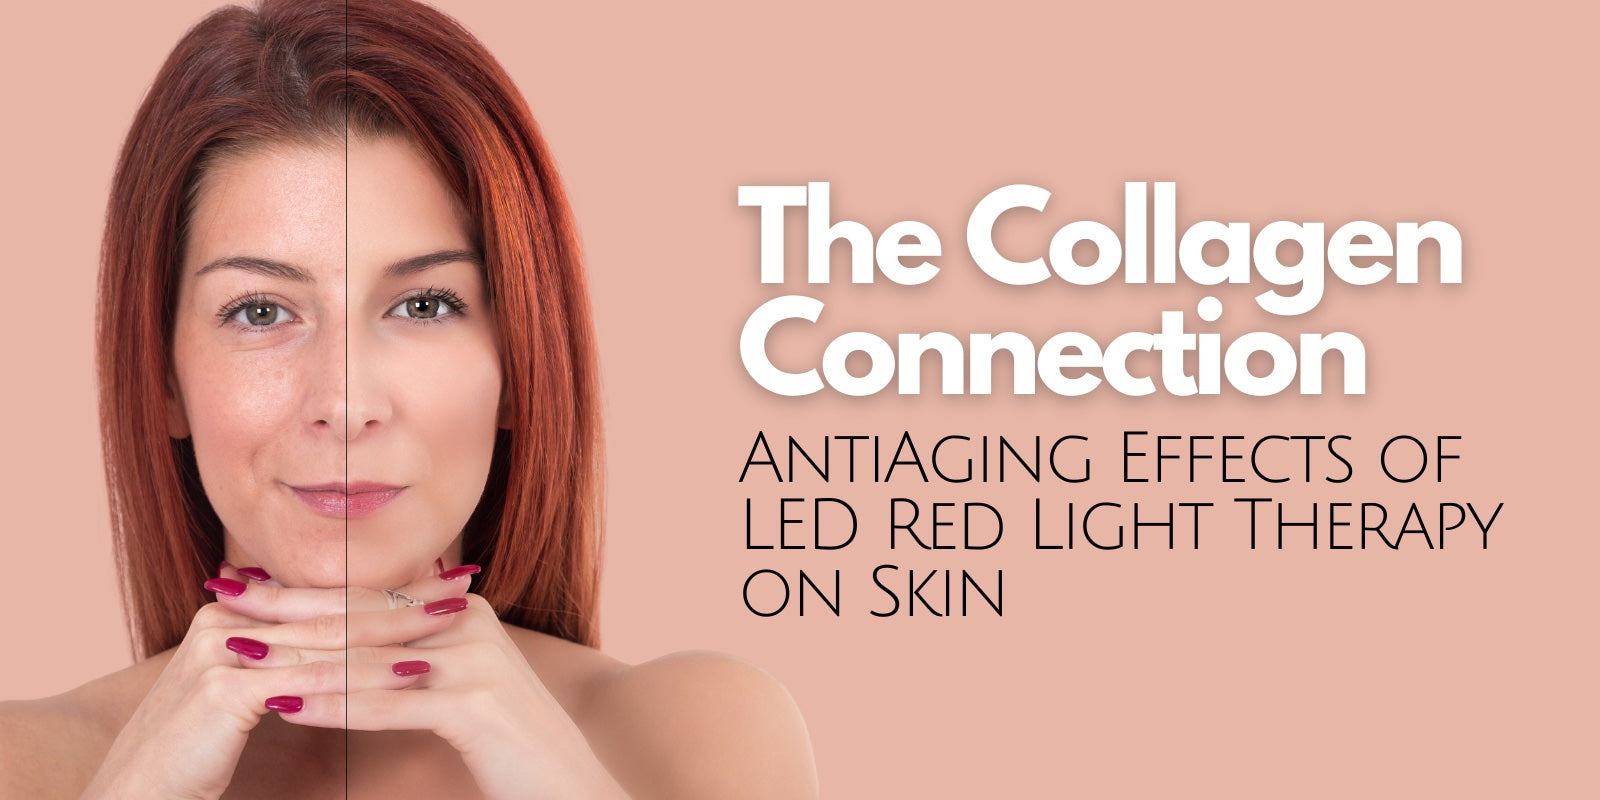 The Collagen Connection: AntiAging Effects of LED Red Light